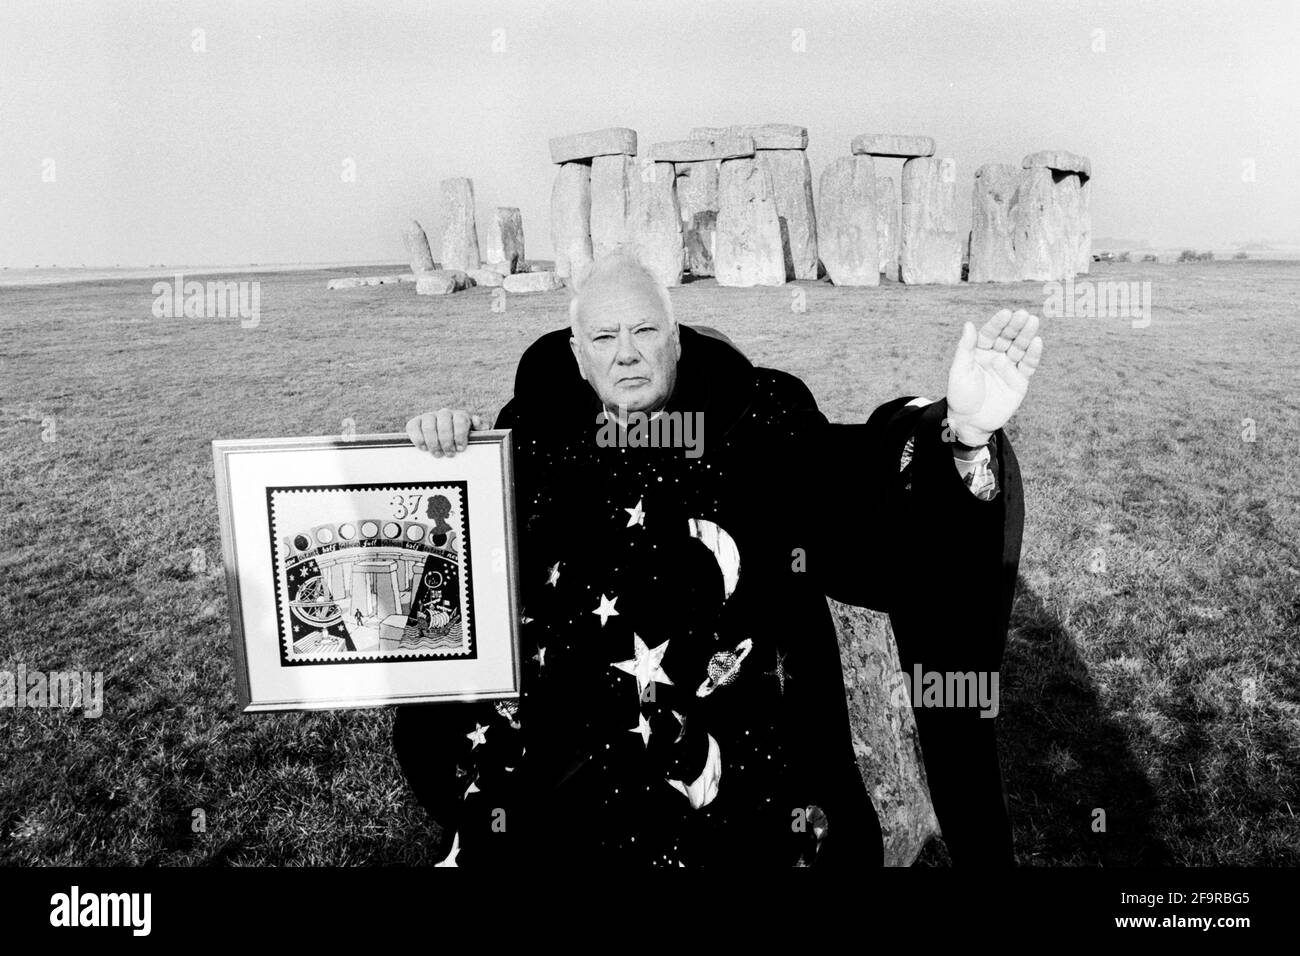 Astronomer Patrick Moore launches a new postage stamp at Stonehenge in December 1990. Stock Photo